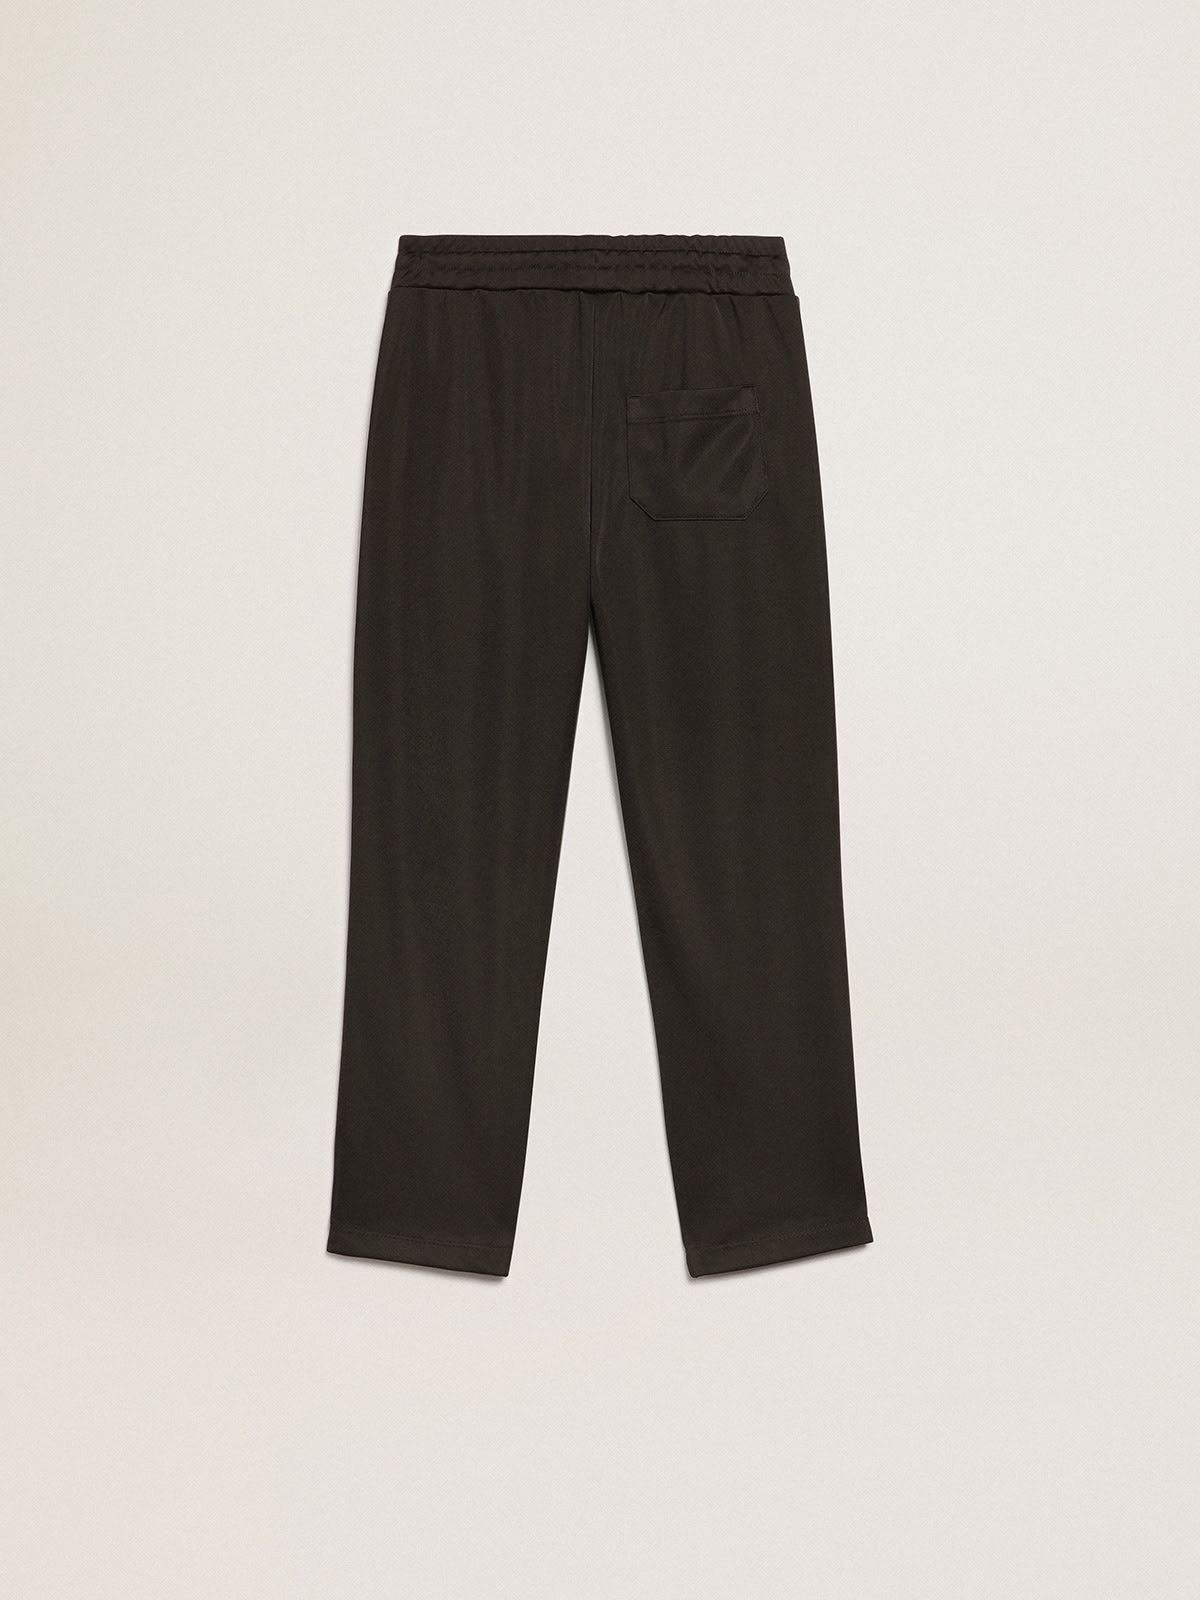 Golden Goose - Black Star Collection jogging pants with contrasting white stars in 